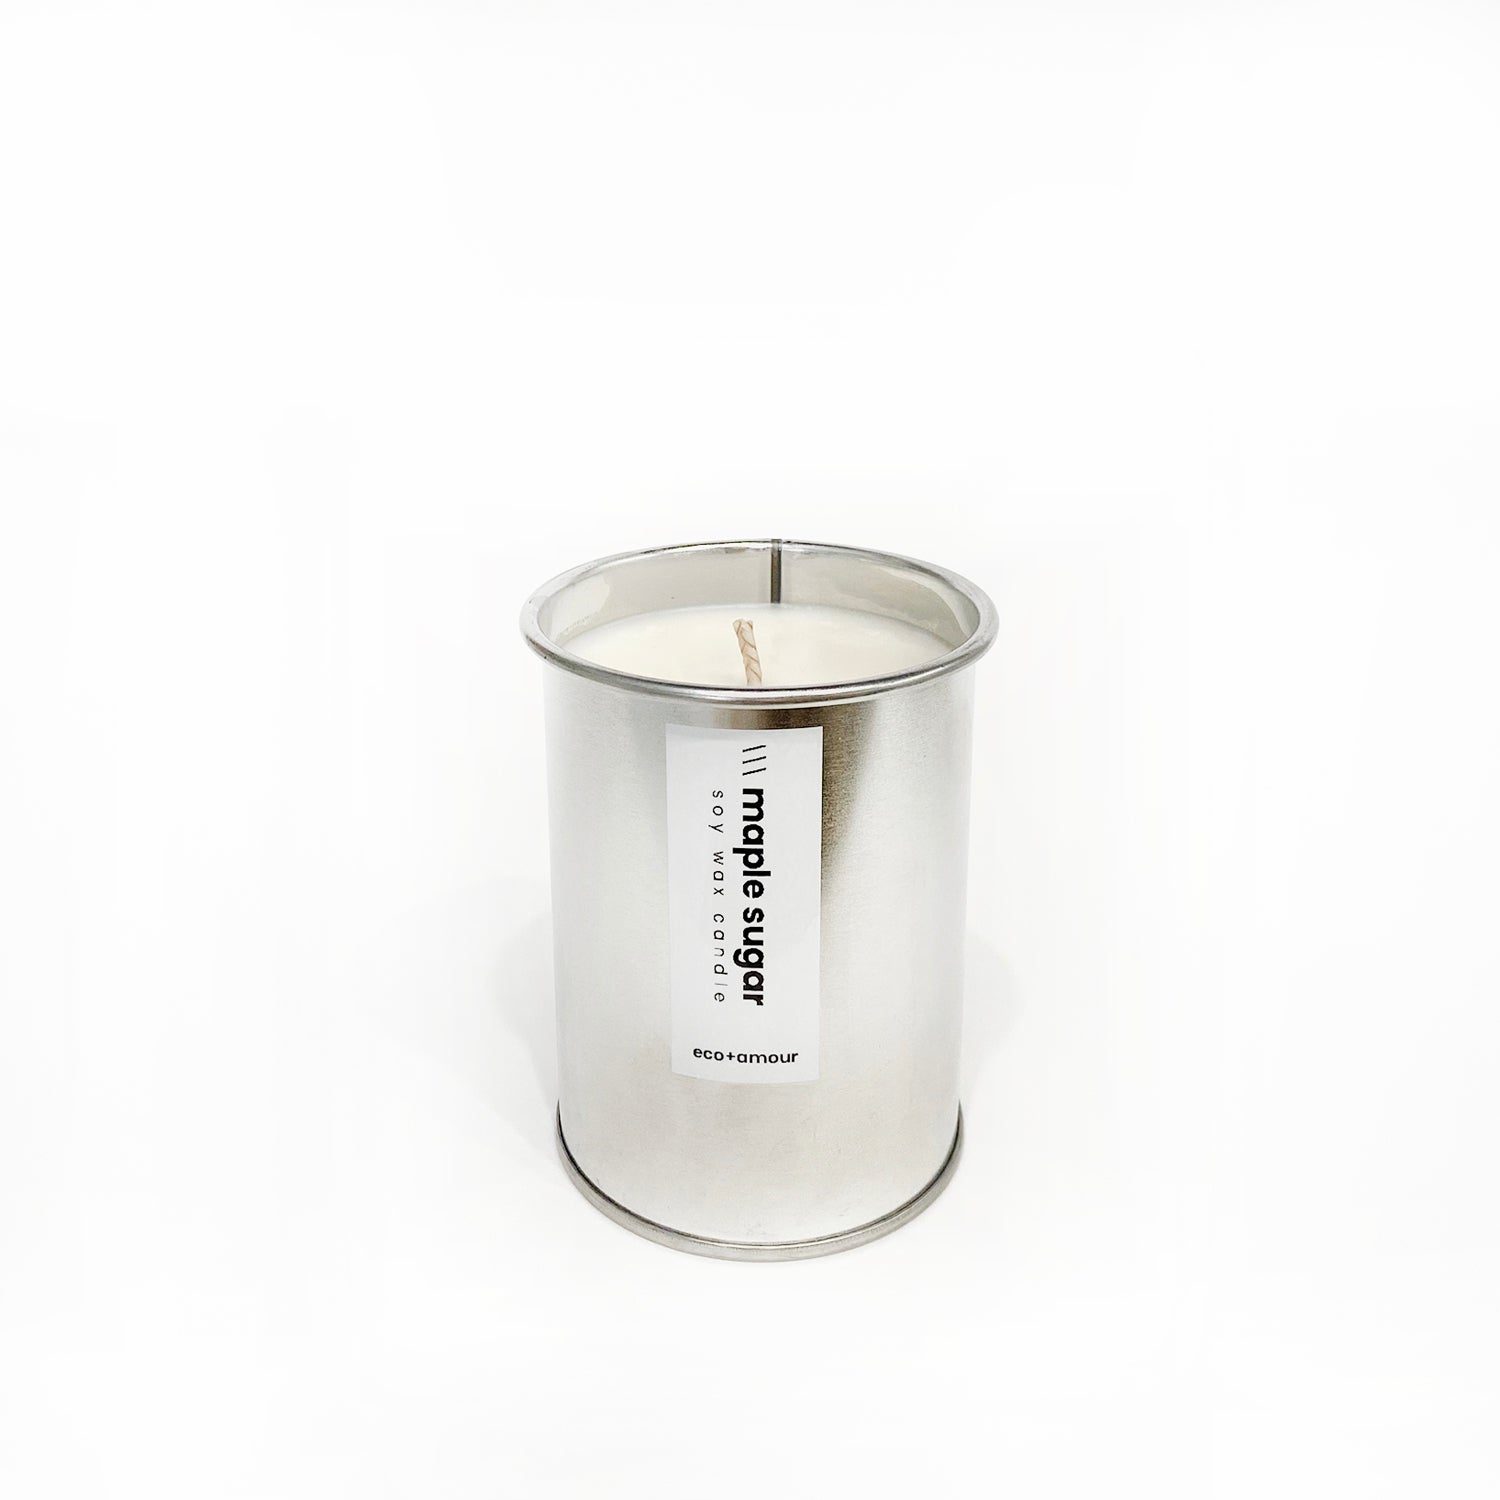 Maple Sugar, Soy Candle | eco+amour